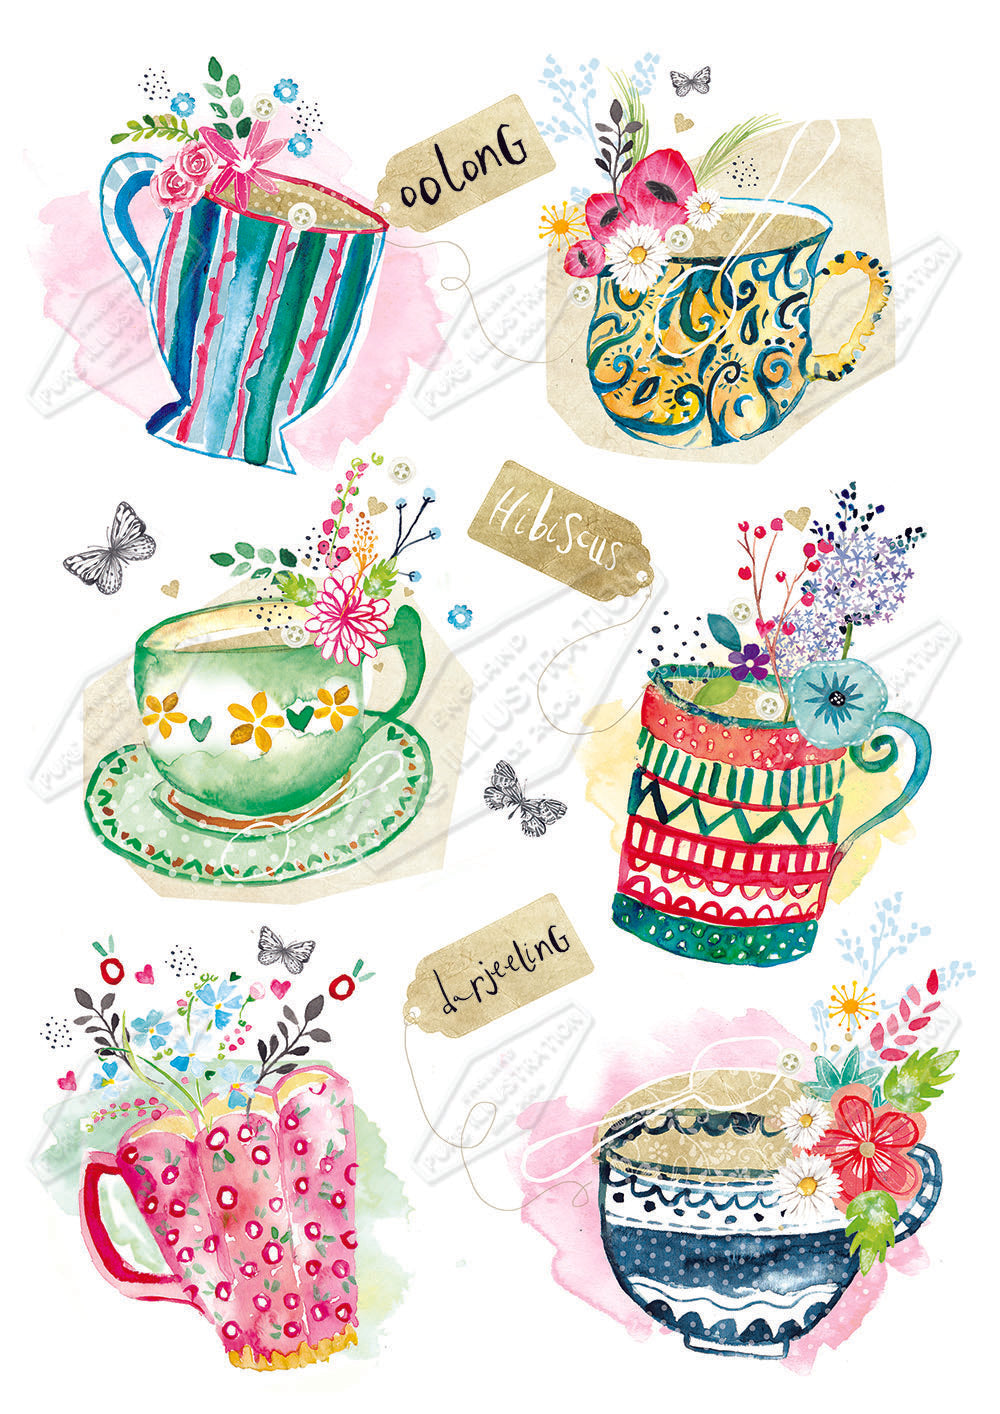 00025476EST- Emily Stalley is represented by Pure Art Licensing Agency - Everyday Greeting Card Design